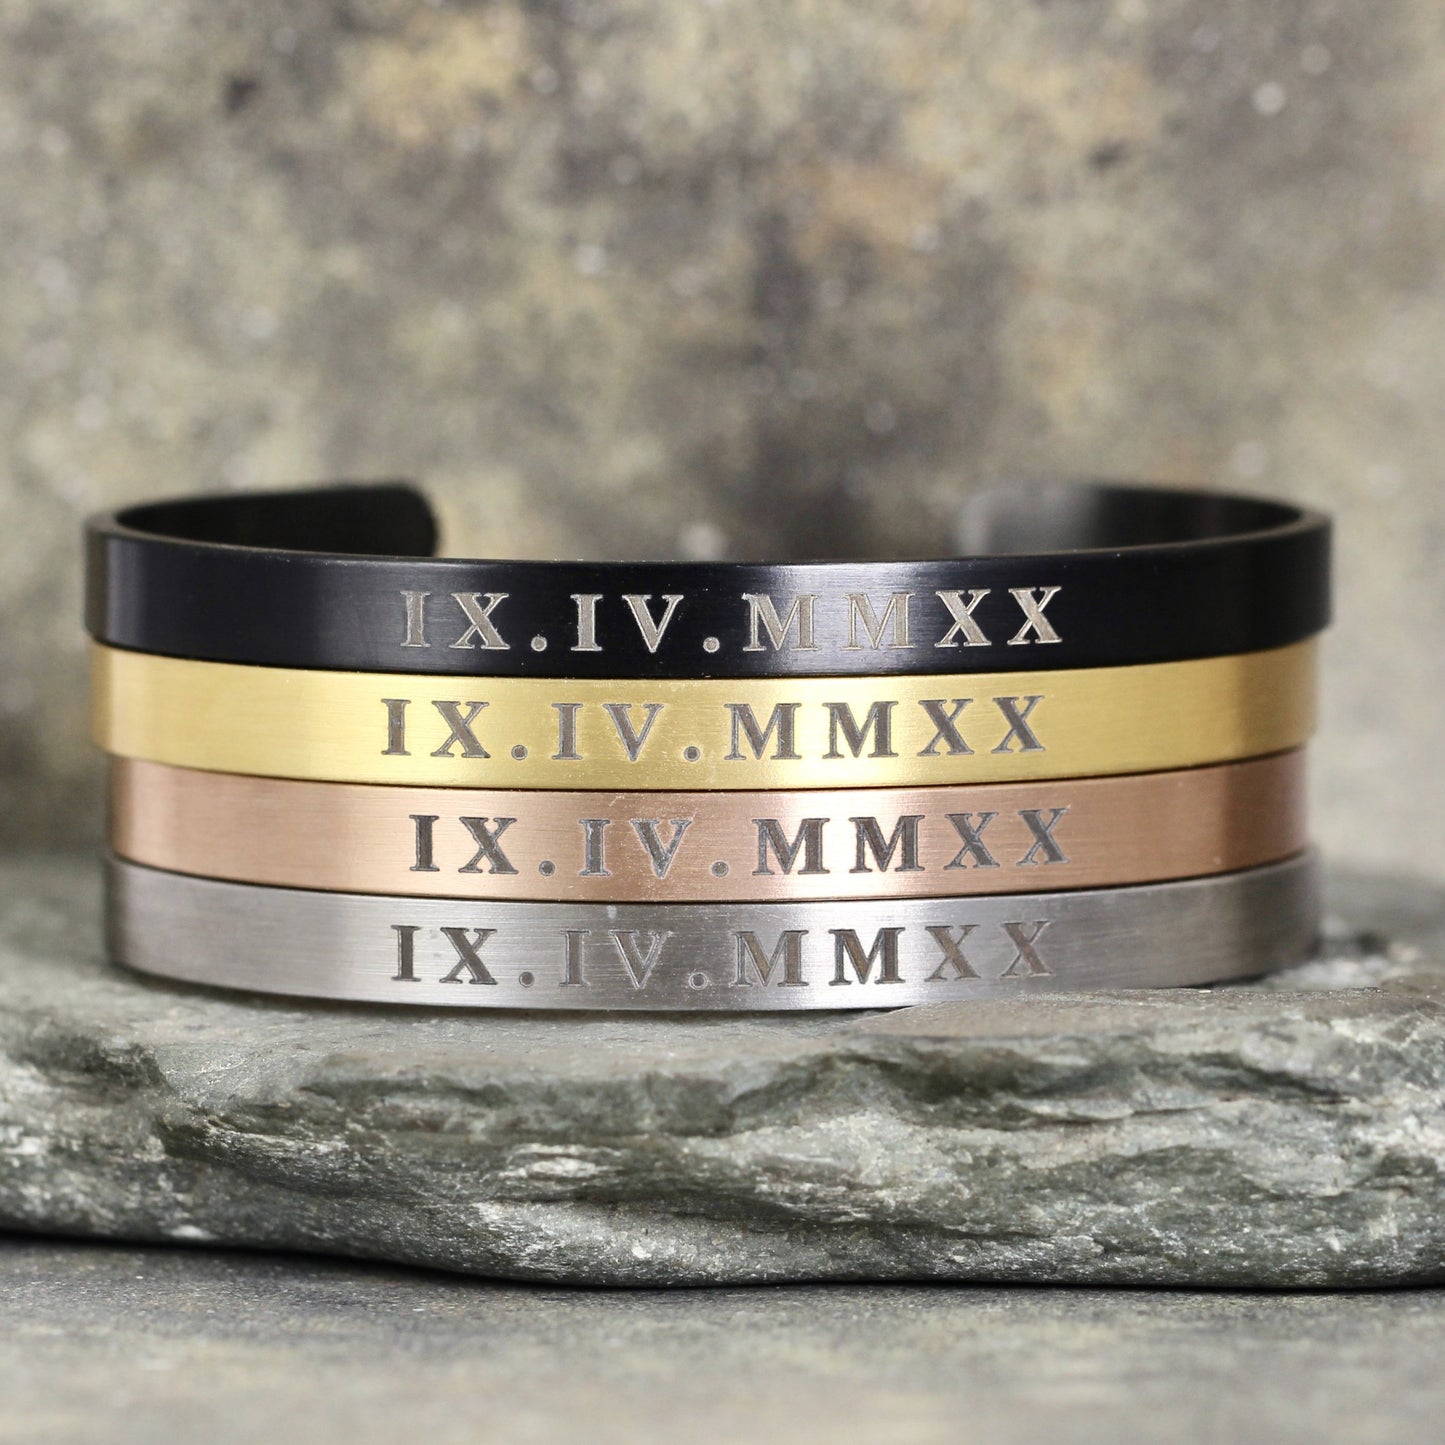 ROMAN NUMERAL Cuff Bracelet - Stainless Steel in your choice of rose, yellow, steel or black - Engraved with your special date